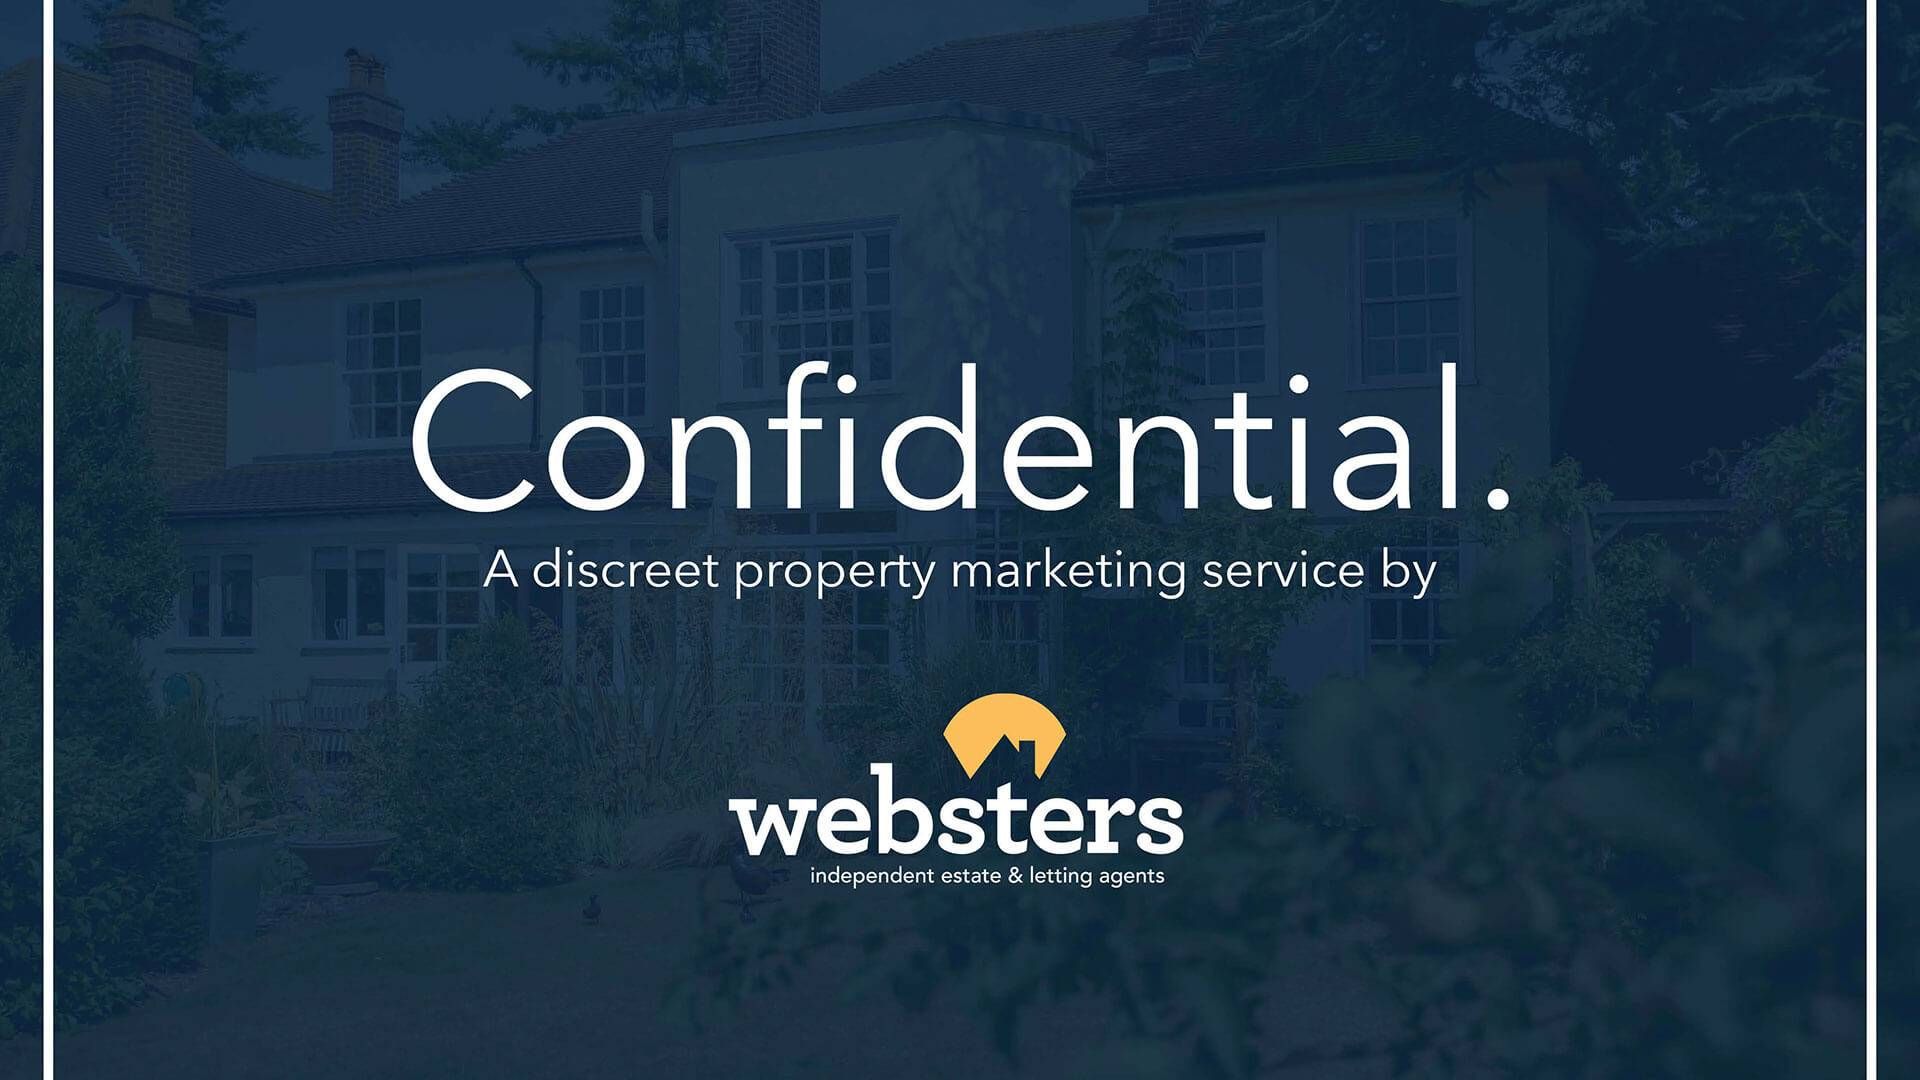 Confidential by Websters